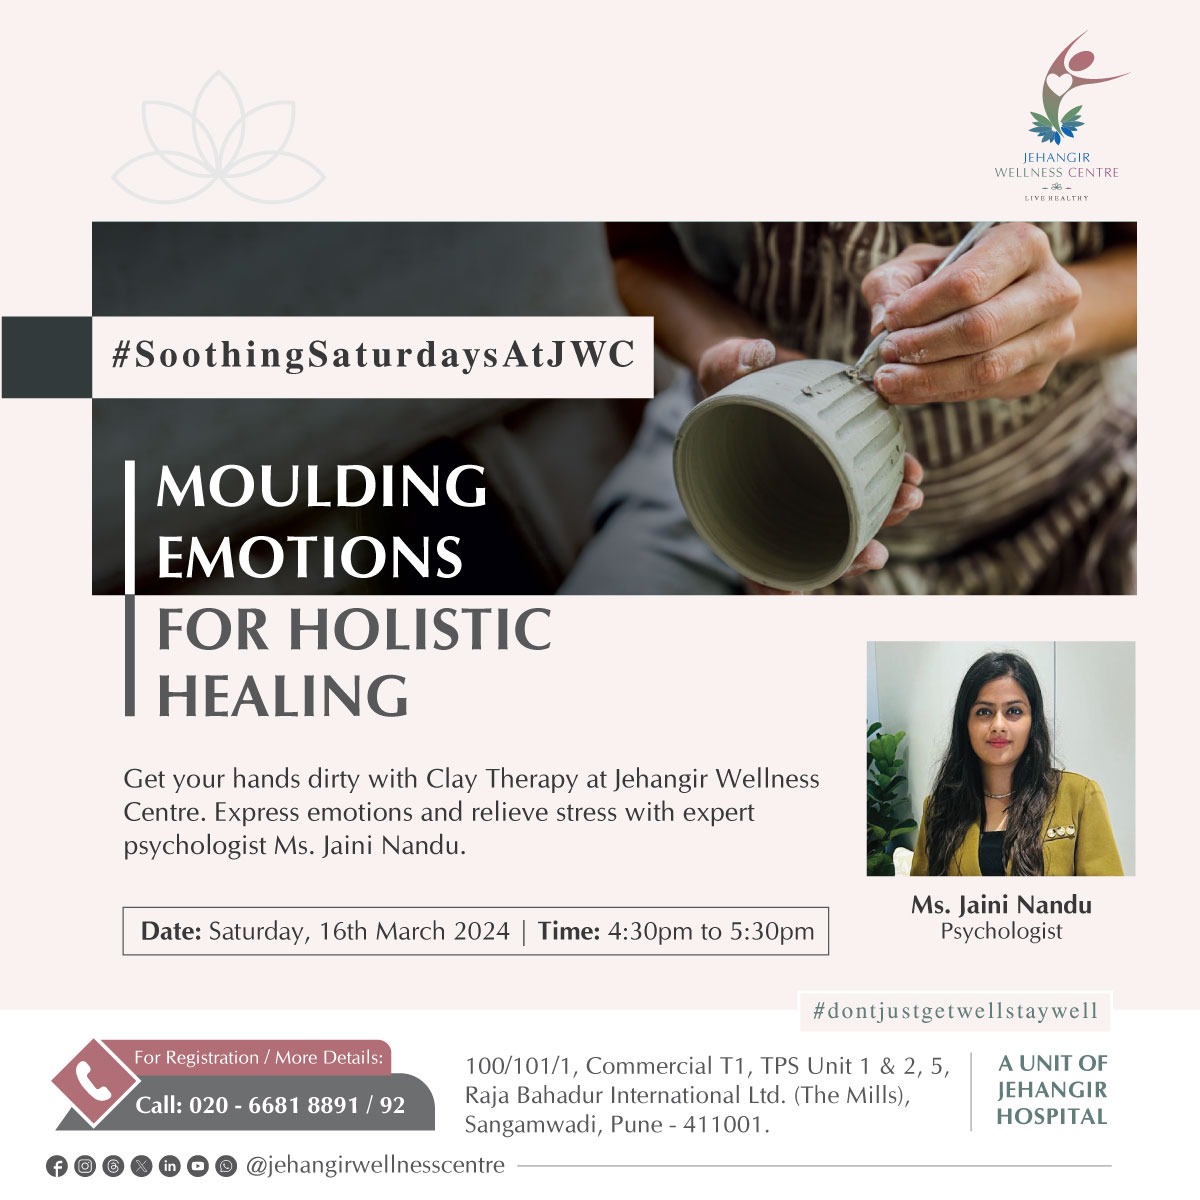 Experience holistic healing at Jehangir Wellness Centre's #SoothingSaturdays on March 16th, 2024, from 4:30 PM to 5:30 PM. Join us for a transformative Clay Therapy session led by Ms. Jaini Nandu, a renowned expert in mental health and psychotherapy. 
#dontjustgetwellstaywell